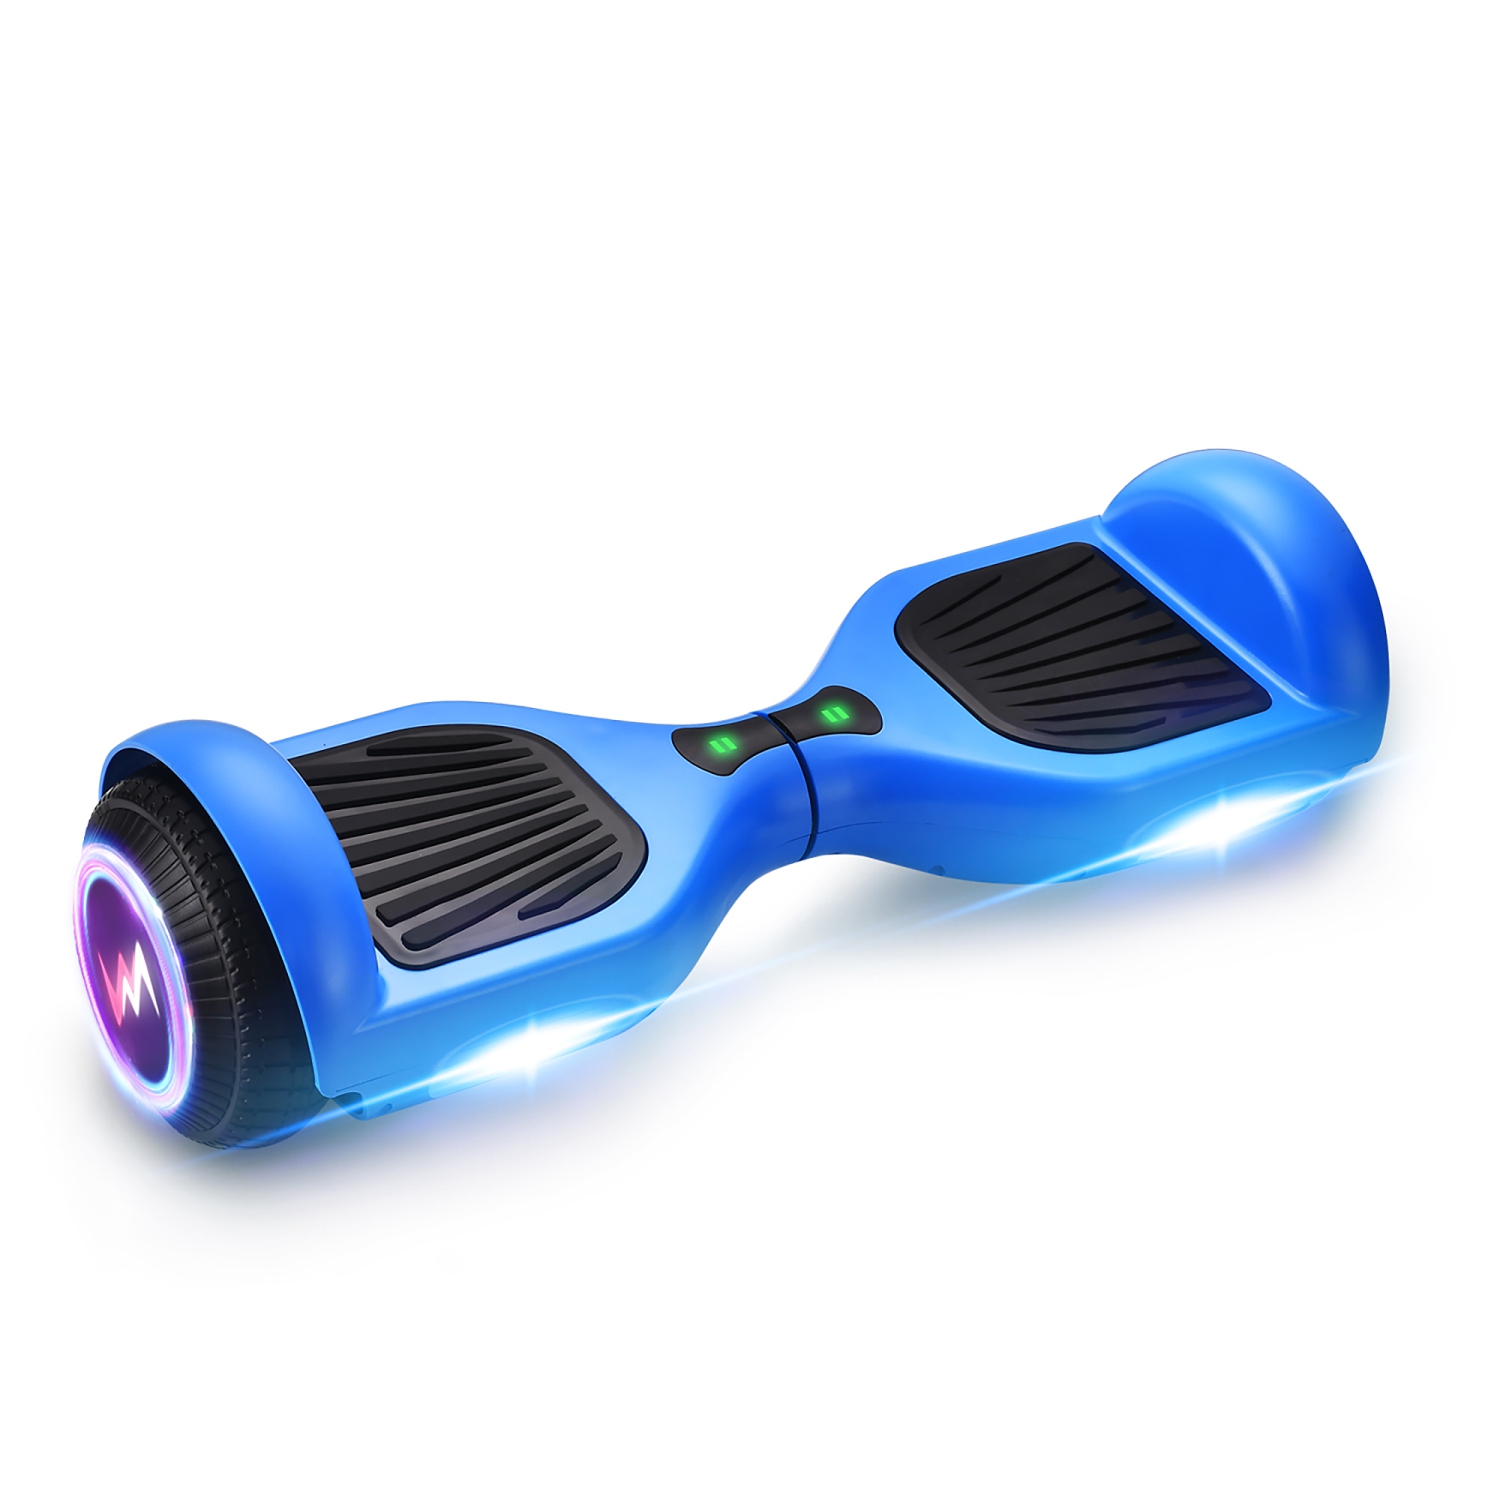 WEELMOTION Classic Blue Hoverboard with Music Speaker and LED Front Lights & Shining Wheels, All Terrain 6.5" UL 2272 Certified Hoverboard with complimentary hover board bag